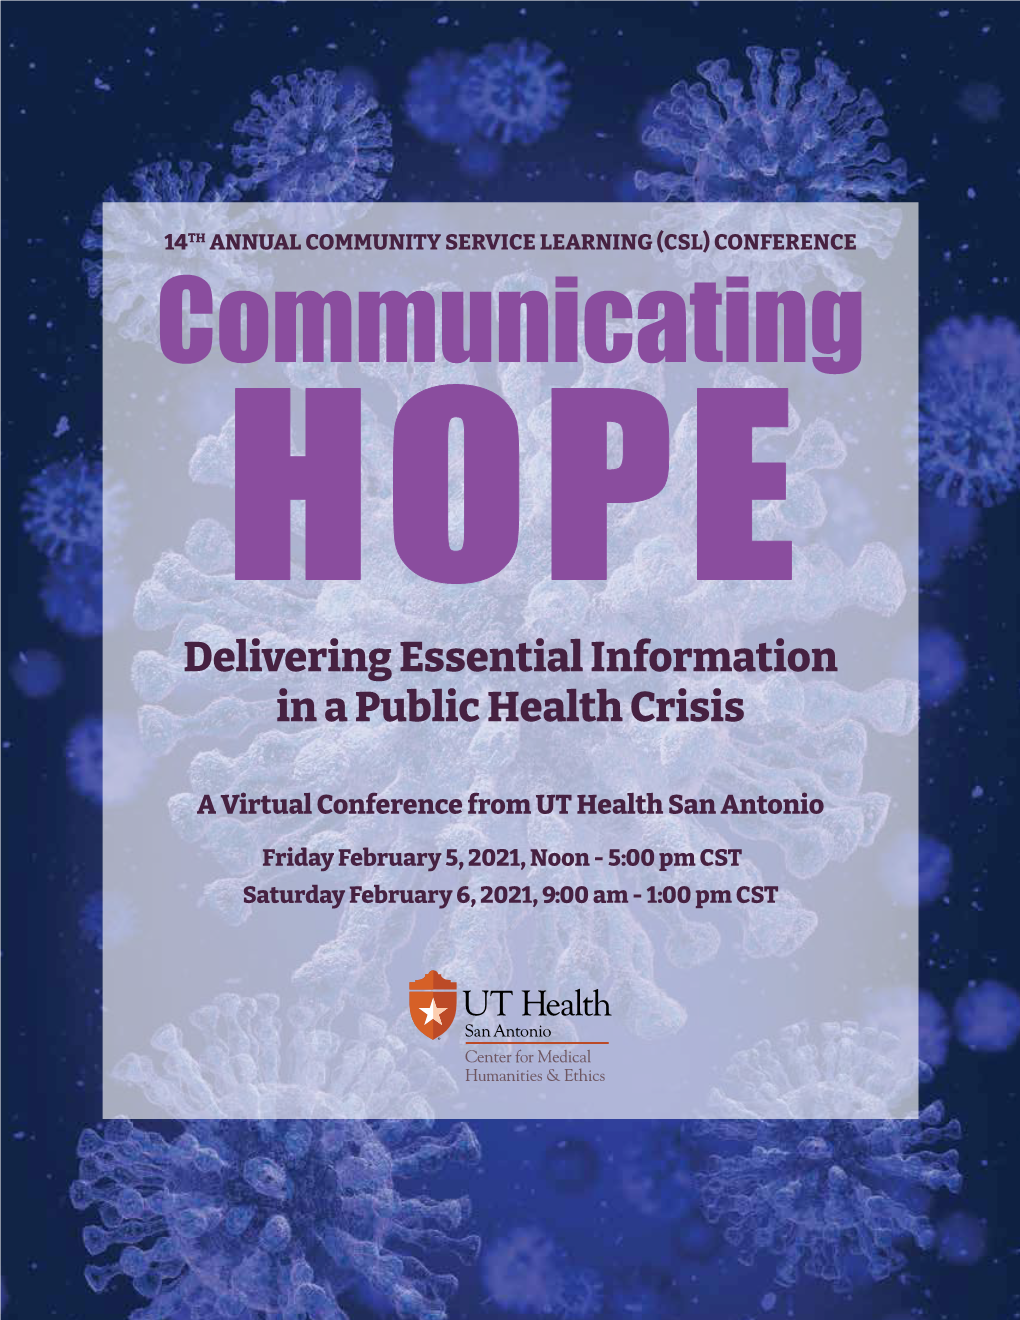 Communicating HOPE Delivering Essential Information in a Public Health Crisis